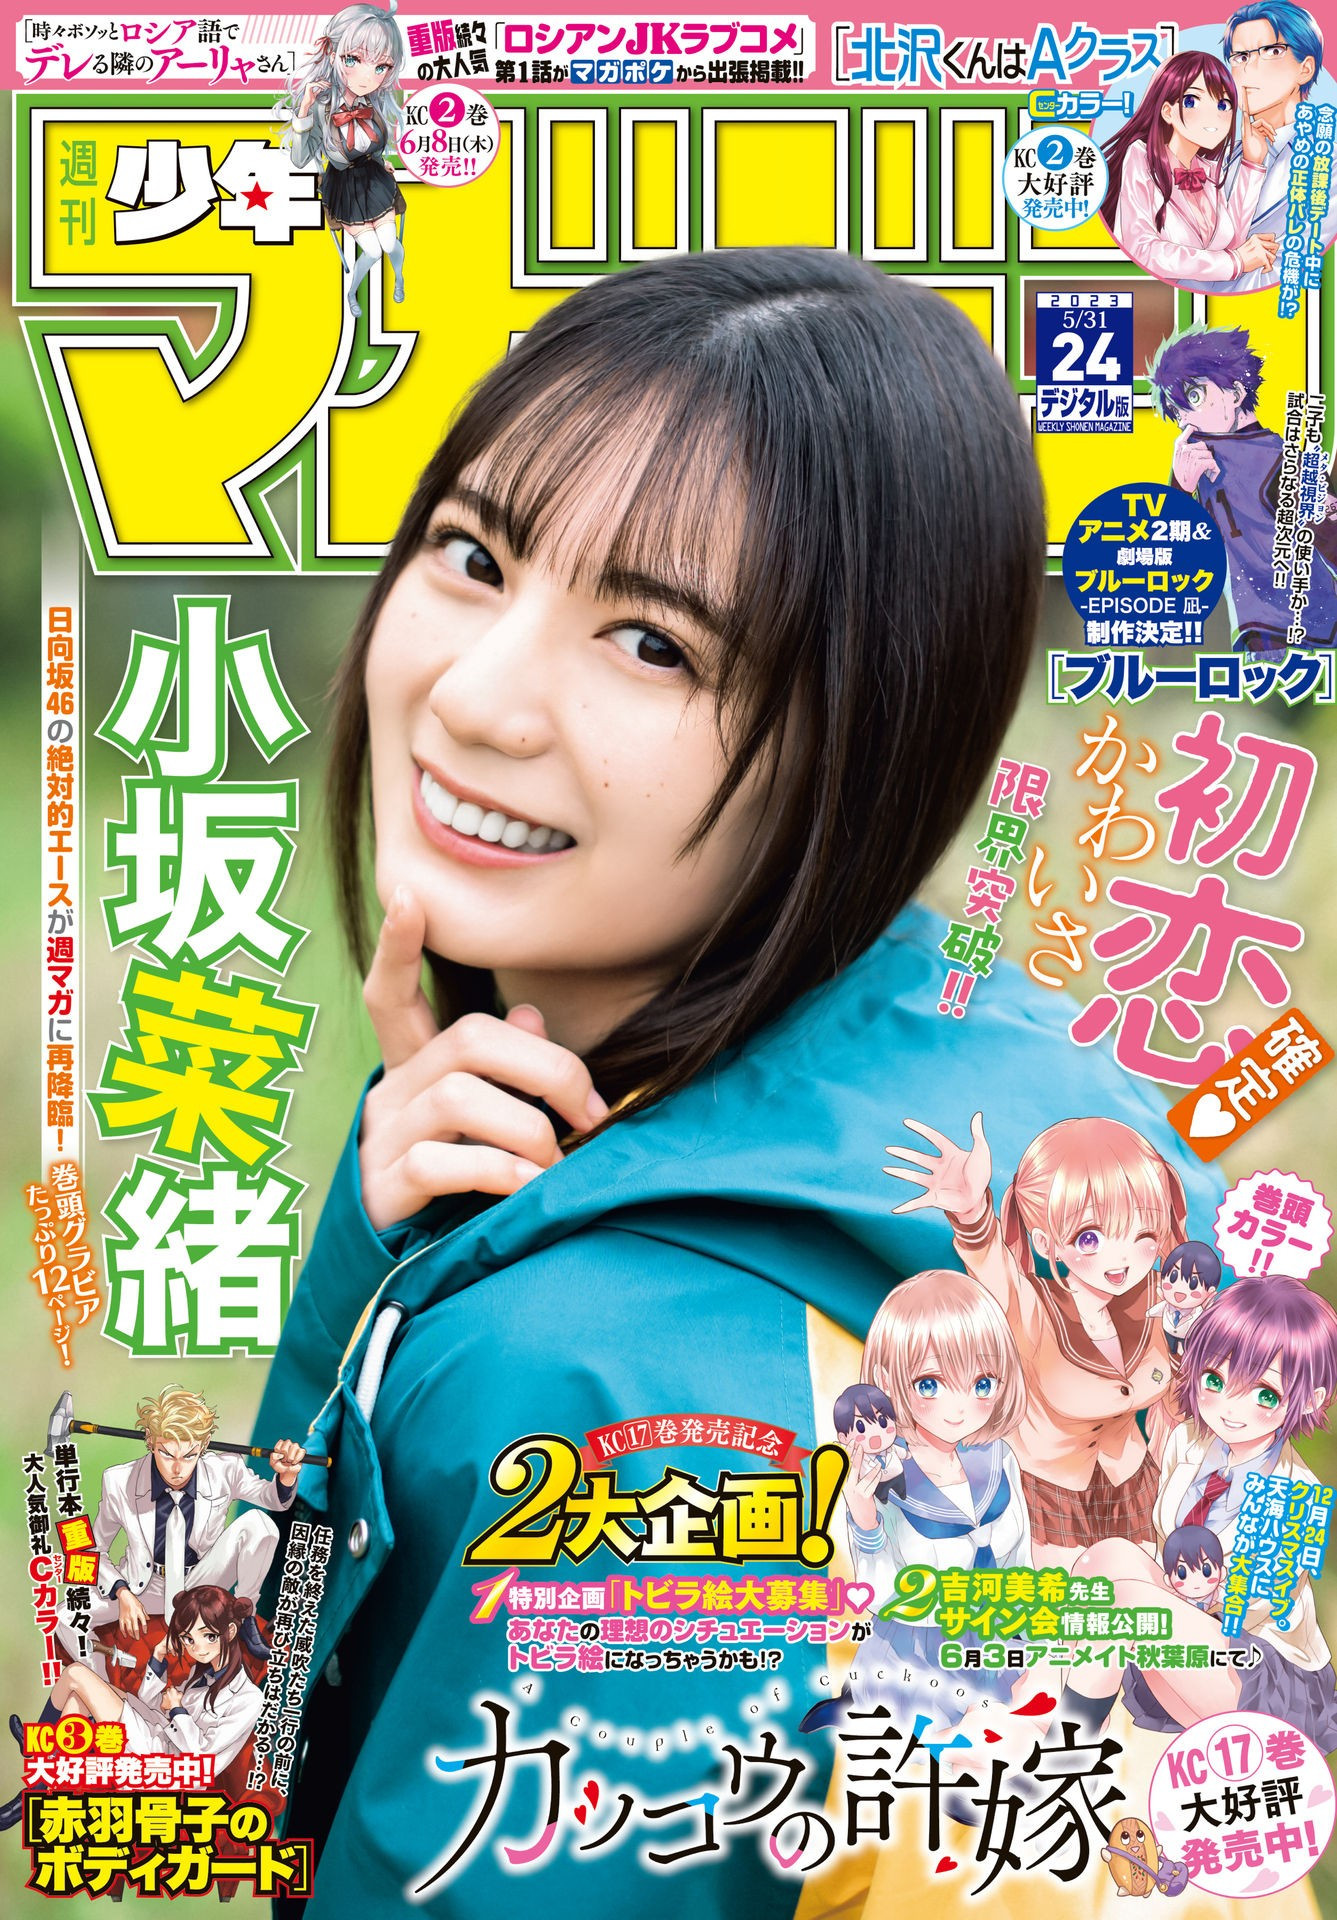 Weekly Shōnen Magazine - 週刊少年マガジン - Chapter 2023-24 - Page 1